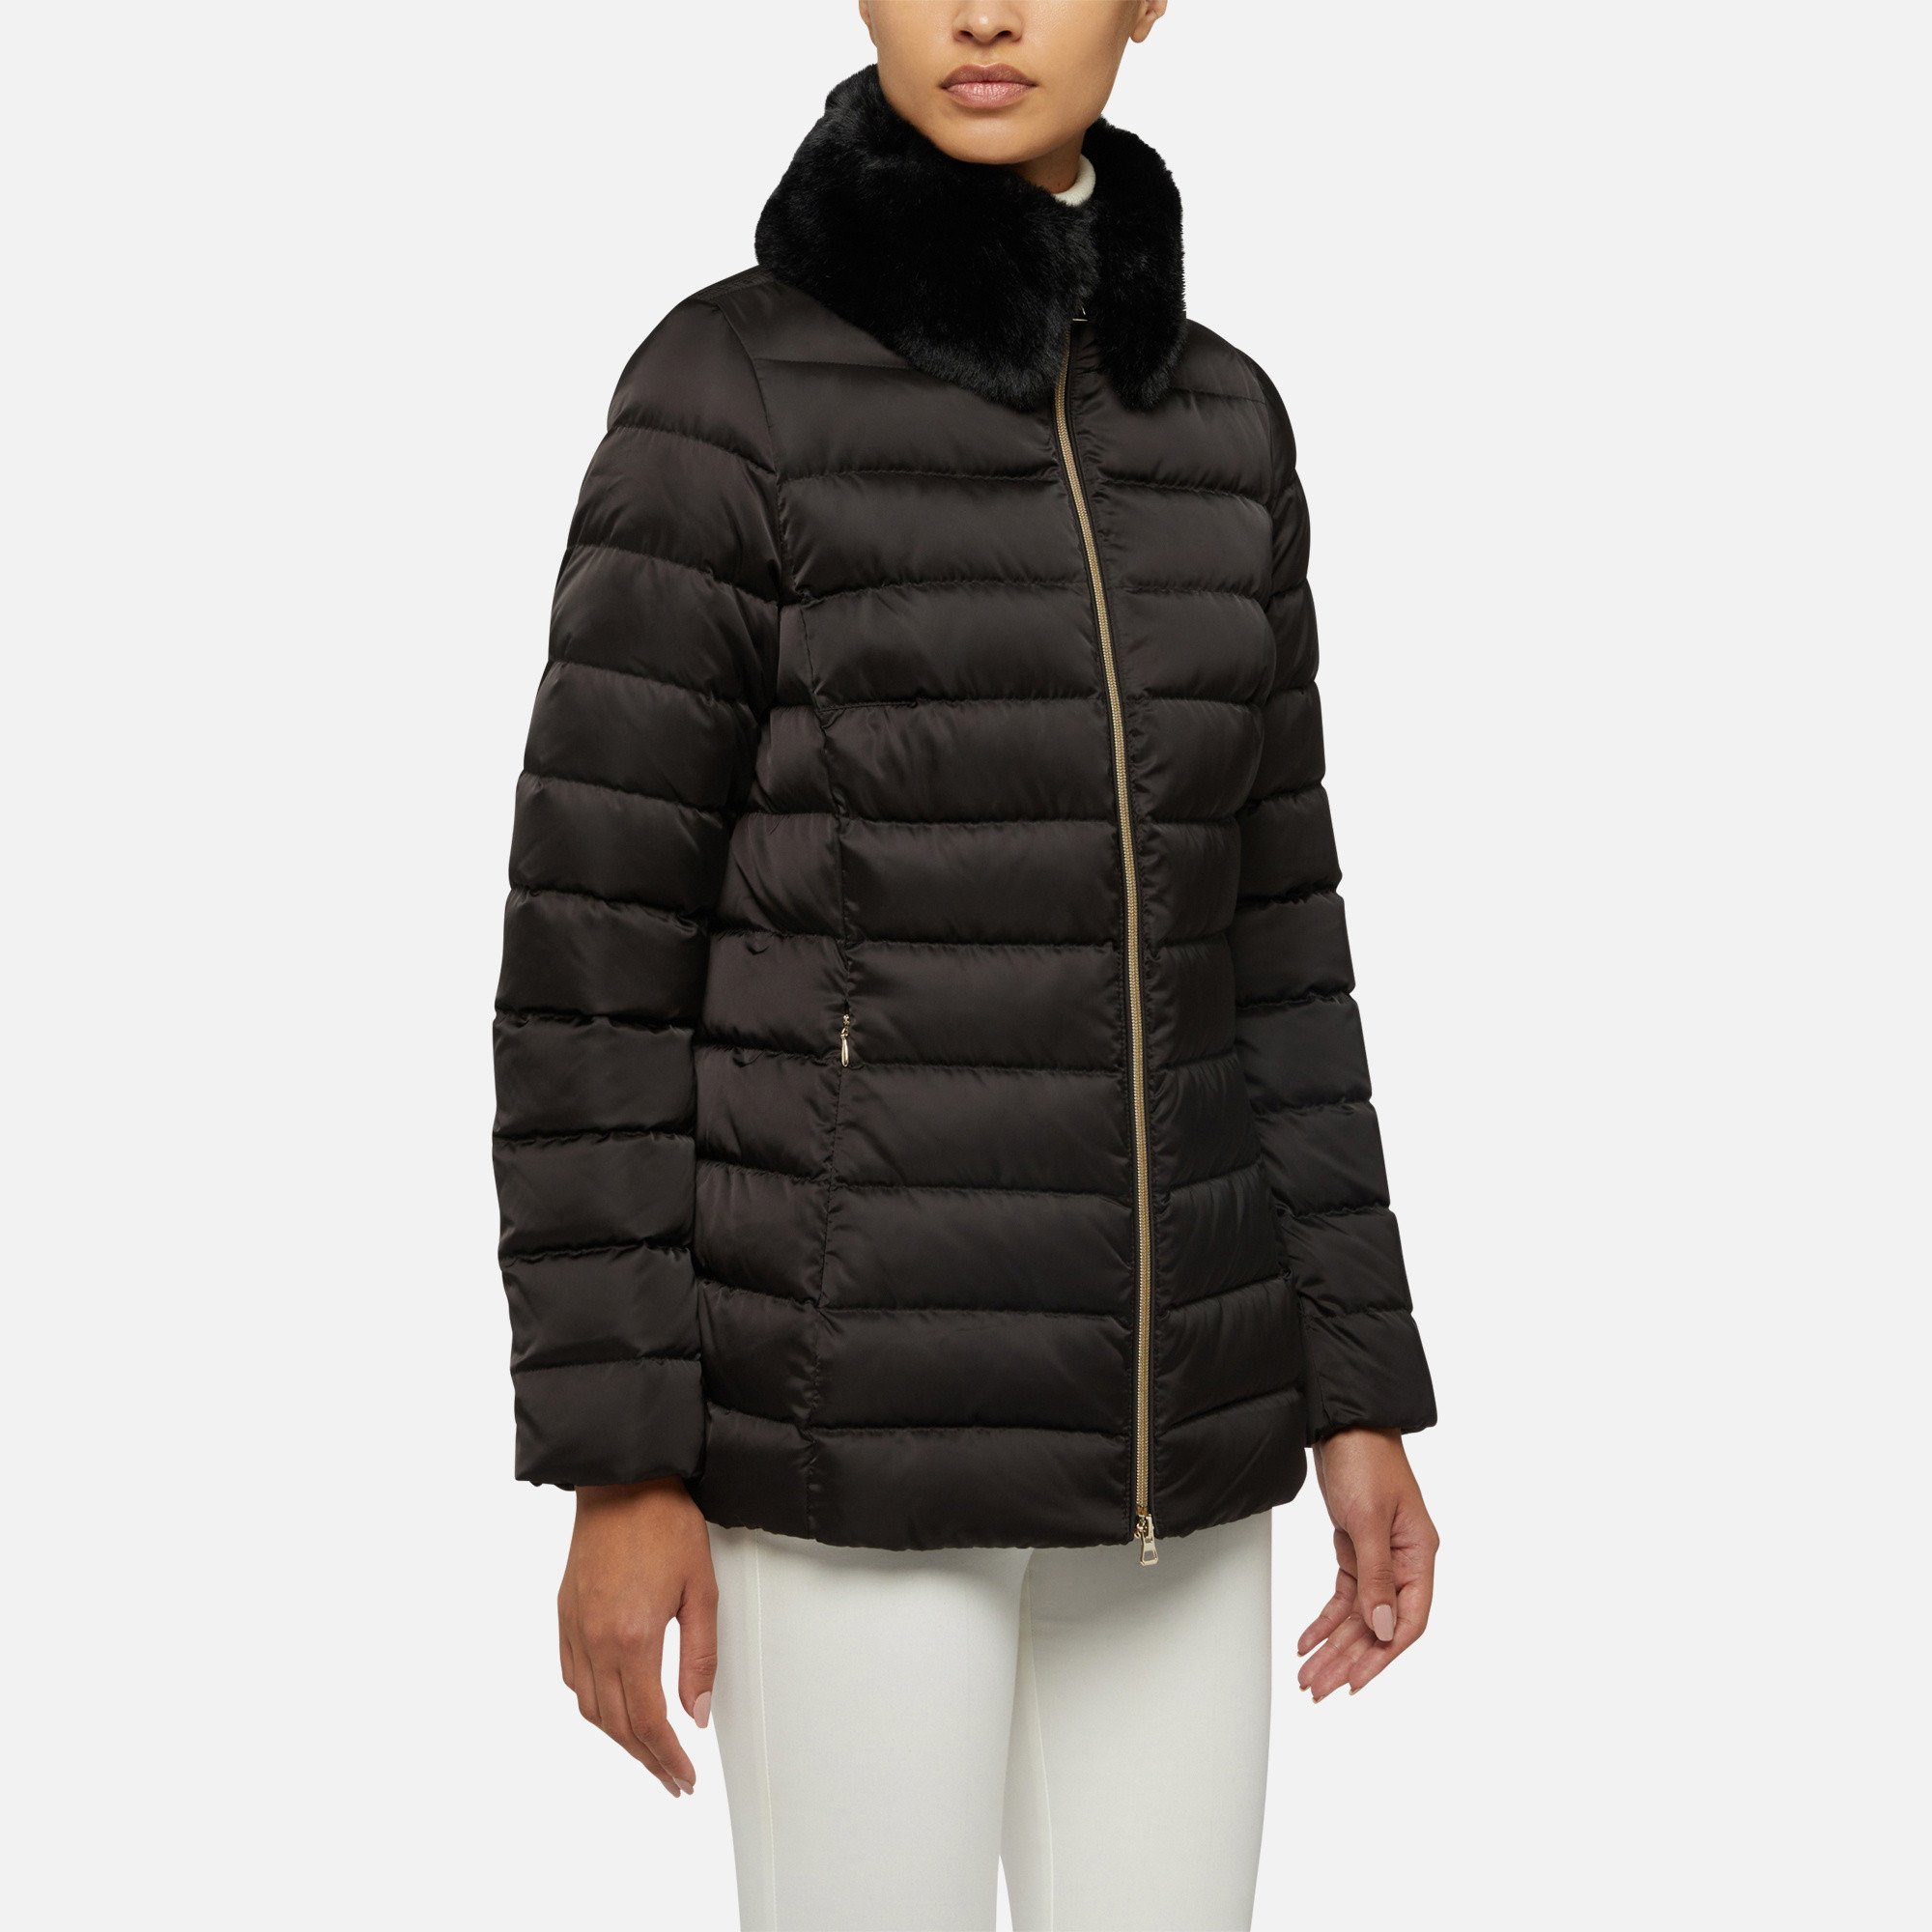 Women's mid-length padded down jacket with a protective collar and lined with synthetic fur.